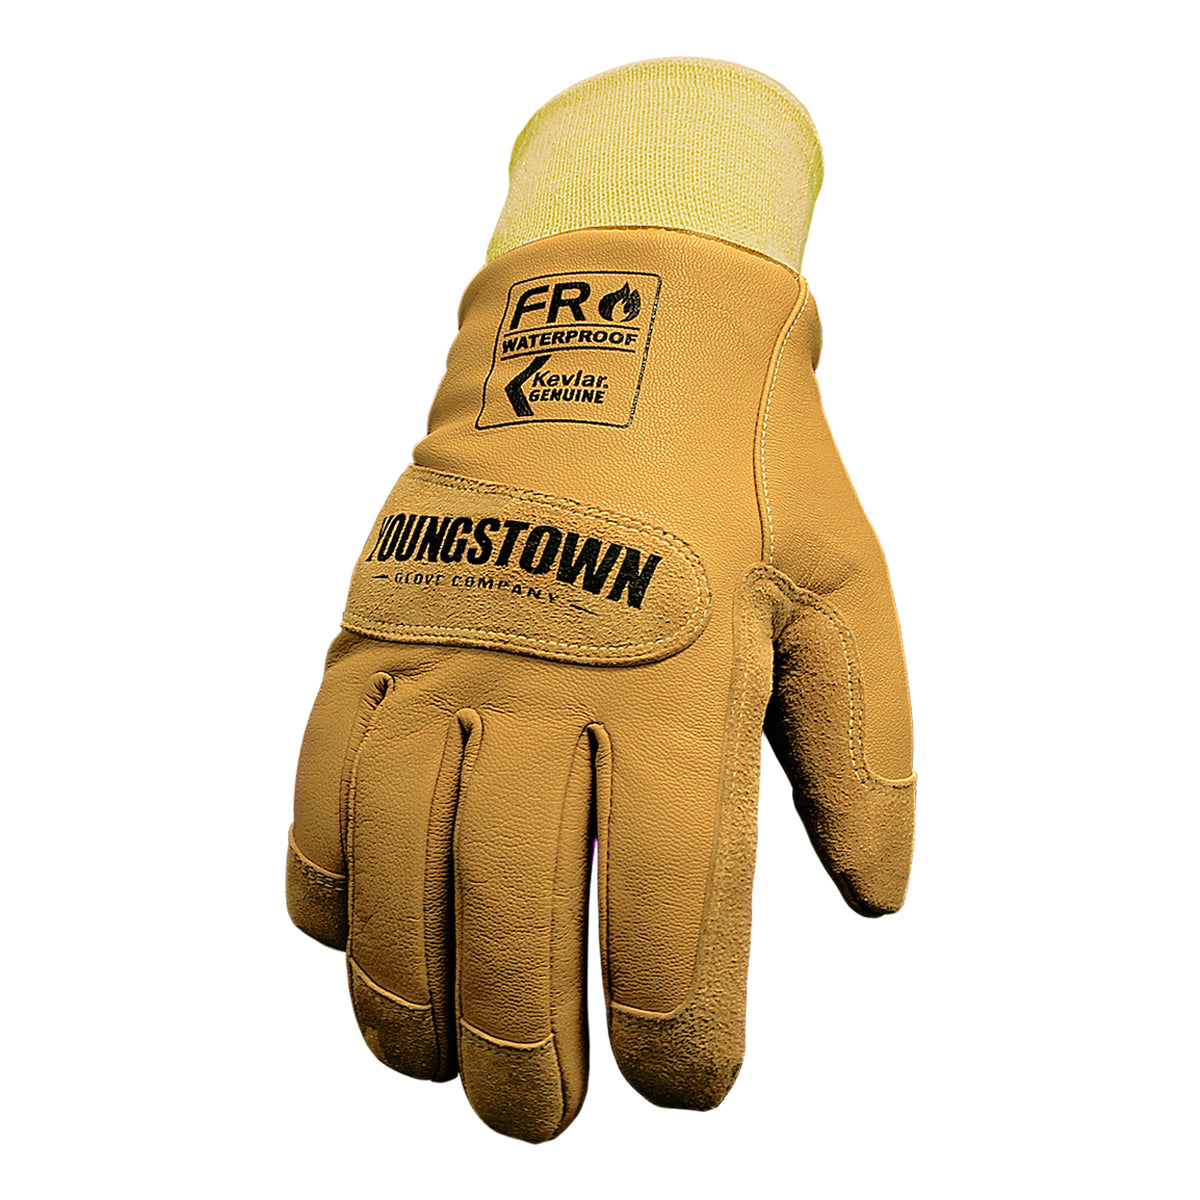 Youngstown Glove Company FR Waterproof Ground Glove Lined w/ Kevlar Tan 3XL 12-3465-60-3XL